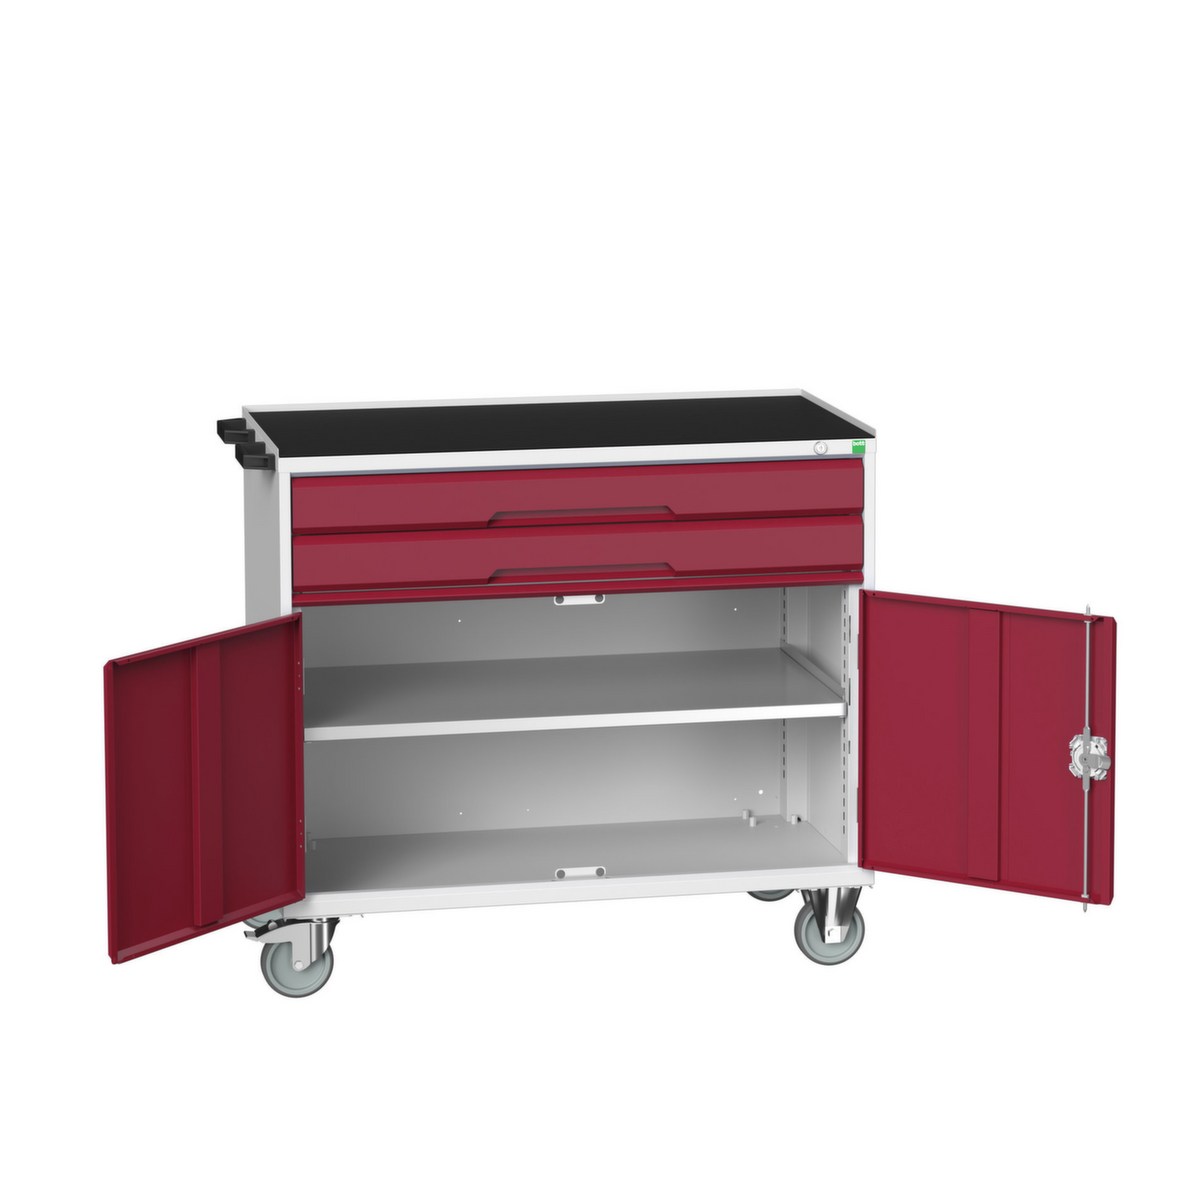 bott Chariot à outils verso, 2 tiroirs, 1 armoire, RAL7035 gris clair/RAL3004 rouge pourpre  ZOOM